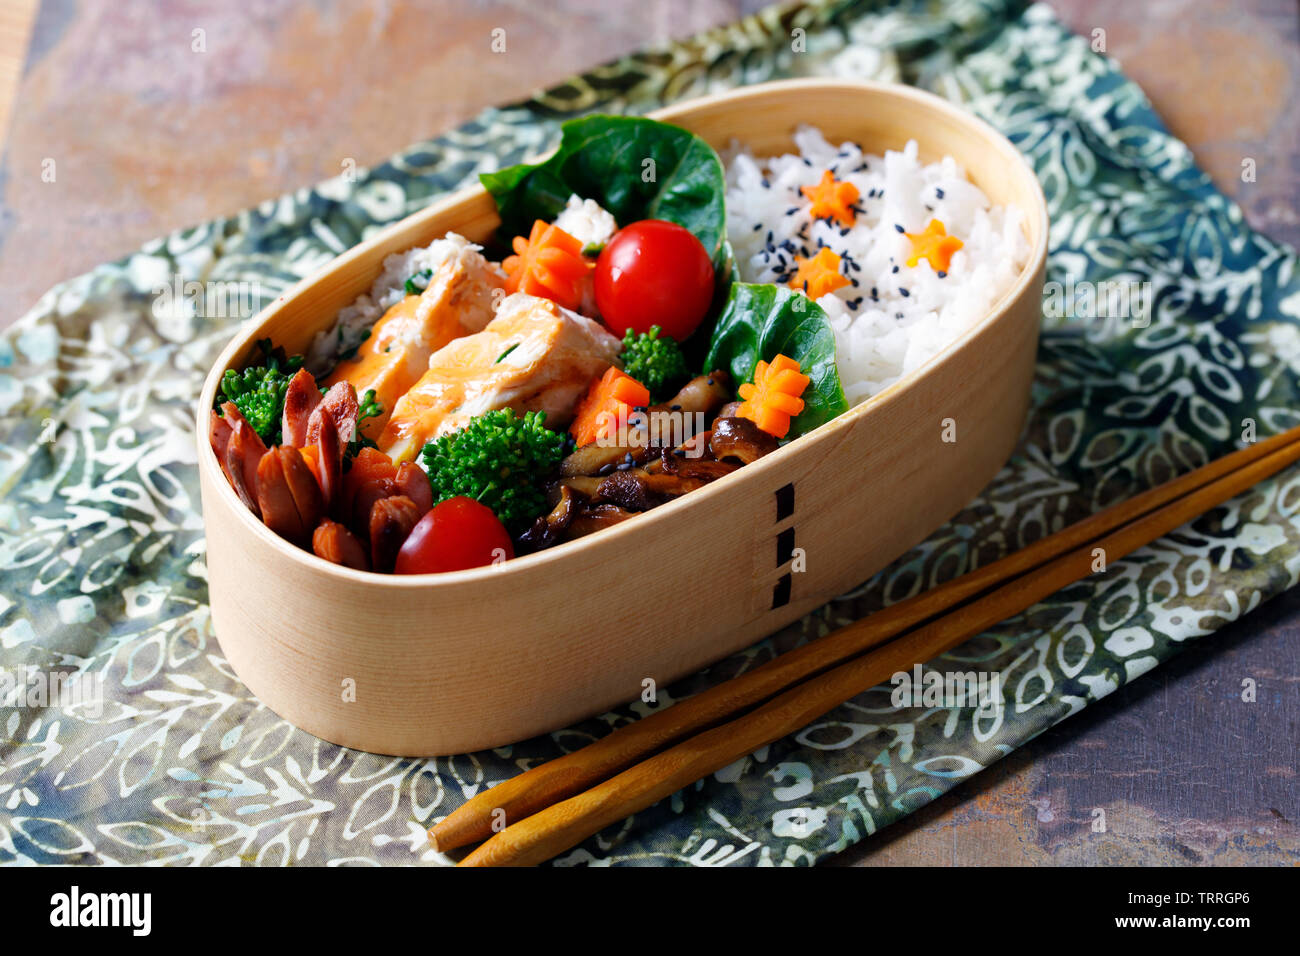 https://c8.alamy.com/comp/TRRGP6/japanese-style-bento-lunch-box-with-chicken-rice-and-vegetables-TRRGP6.jpg